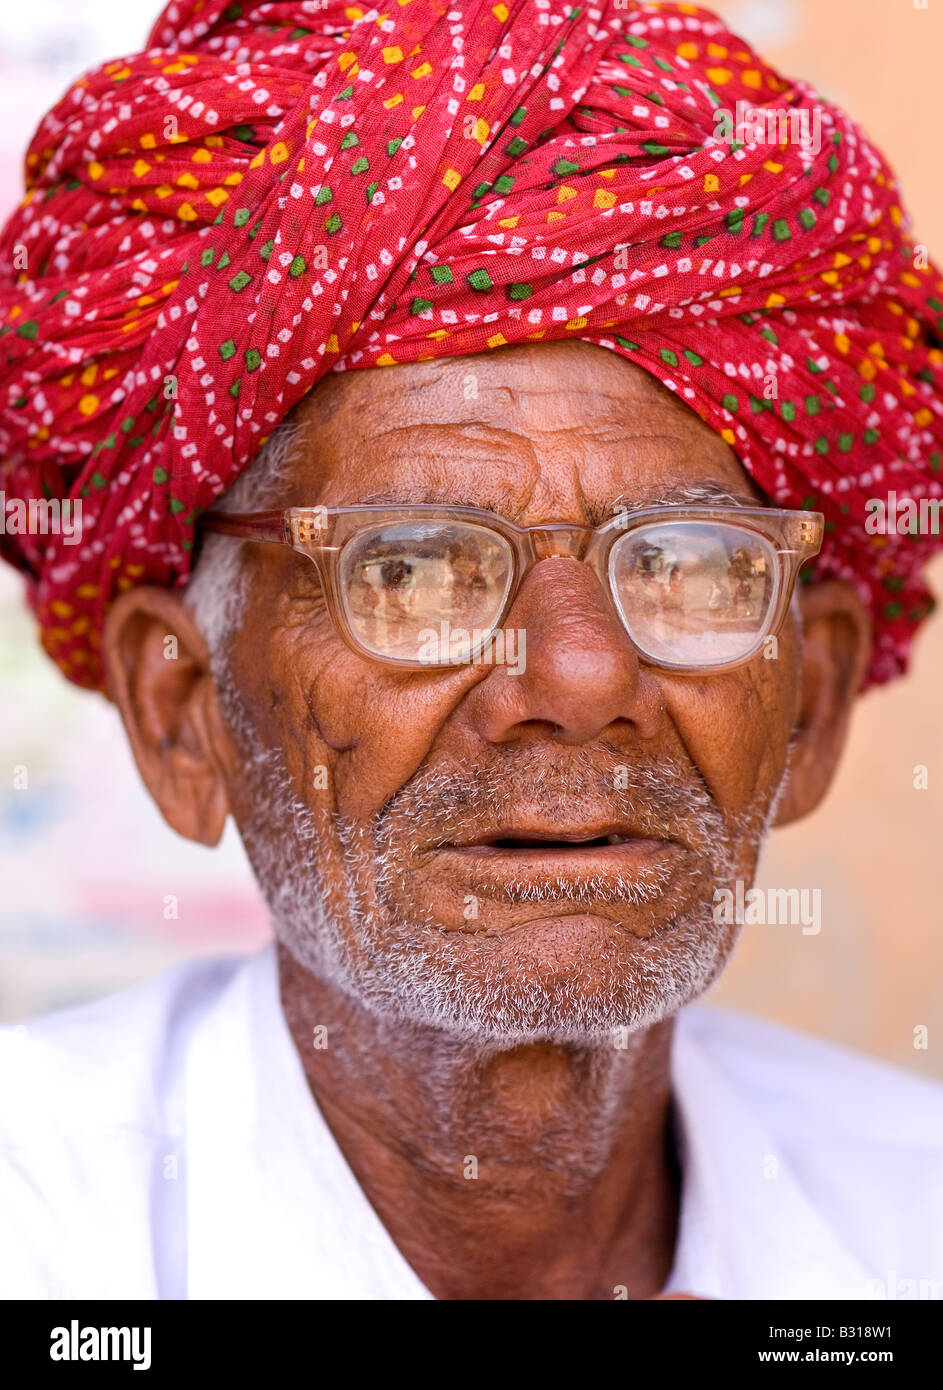 Portrait of local man, Jaipur City, Rajasthan, India, Subcontinent, Asia Stock Photo